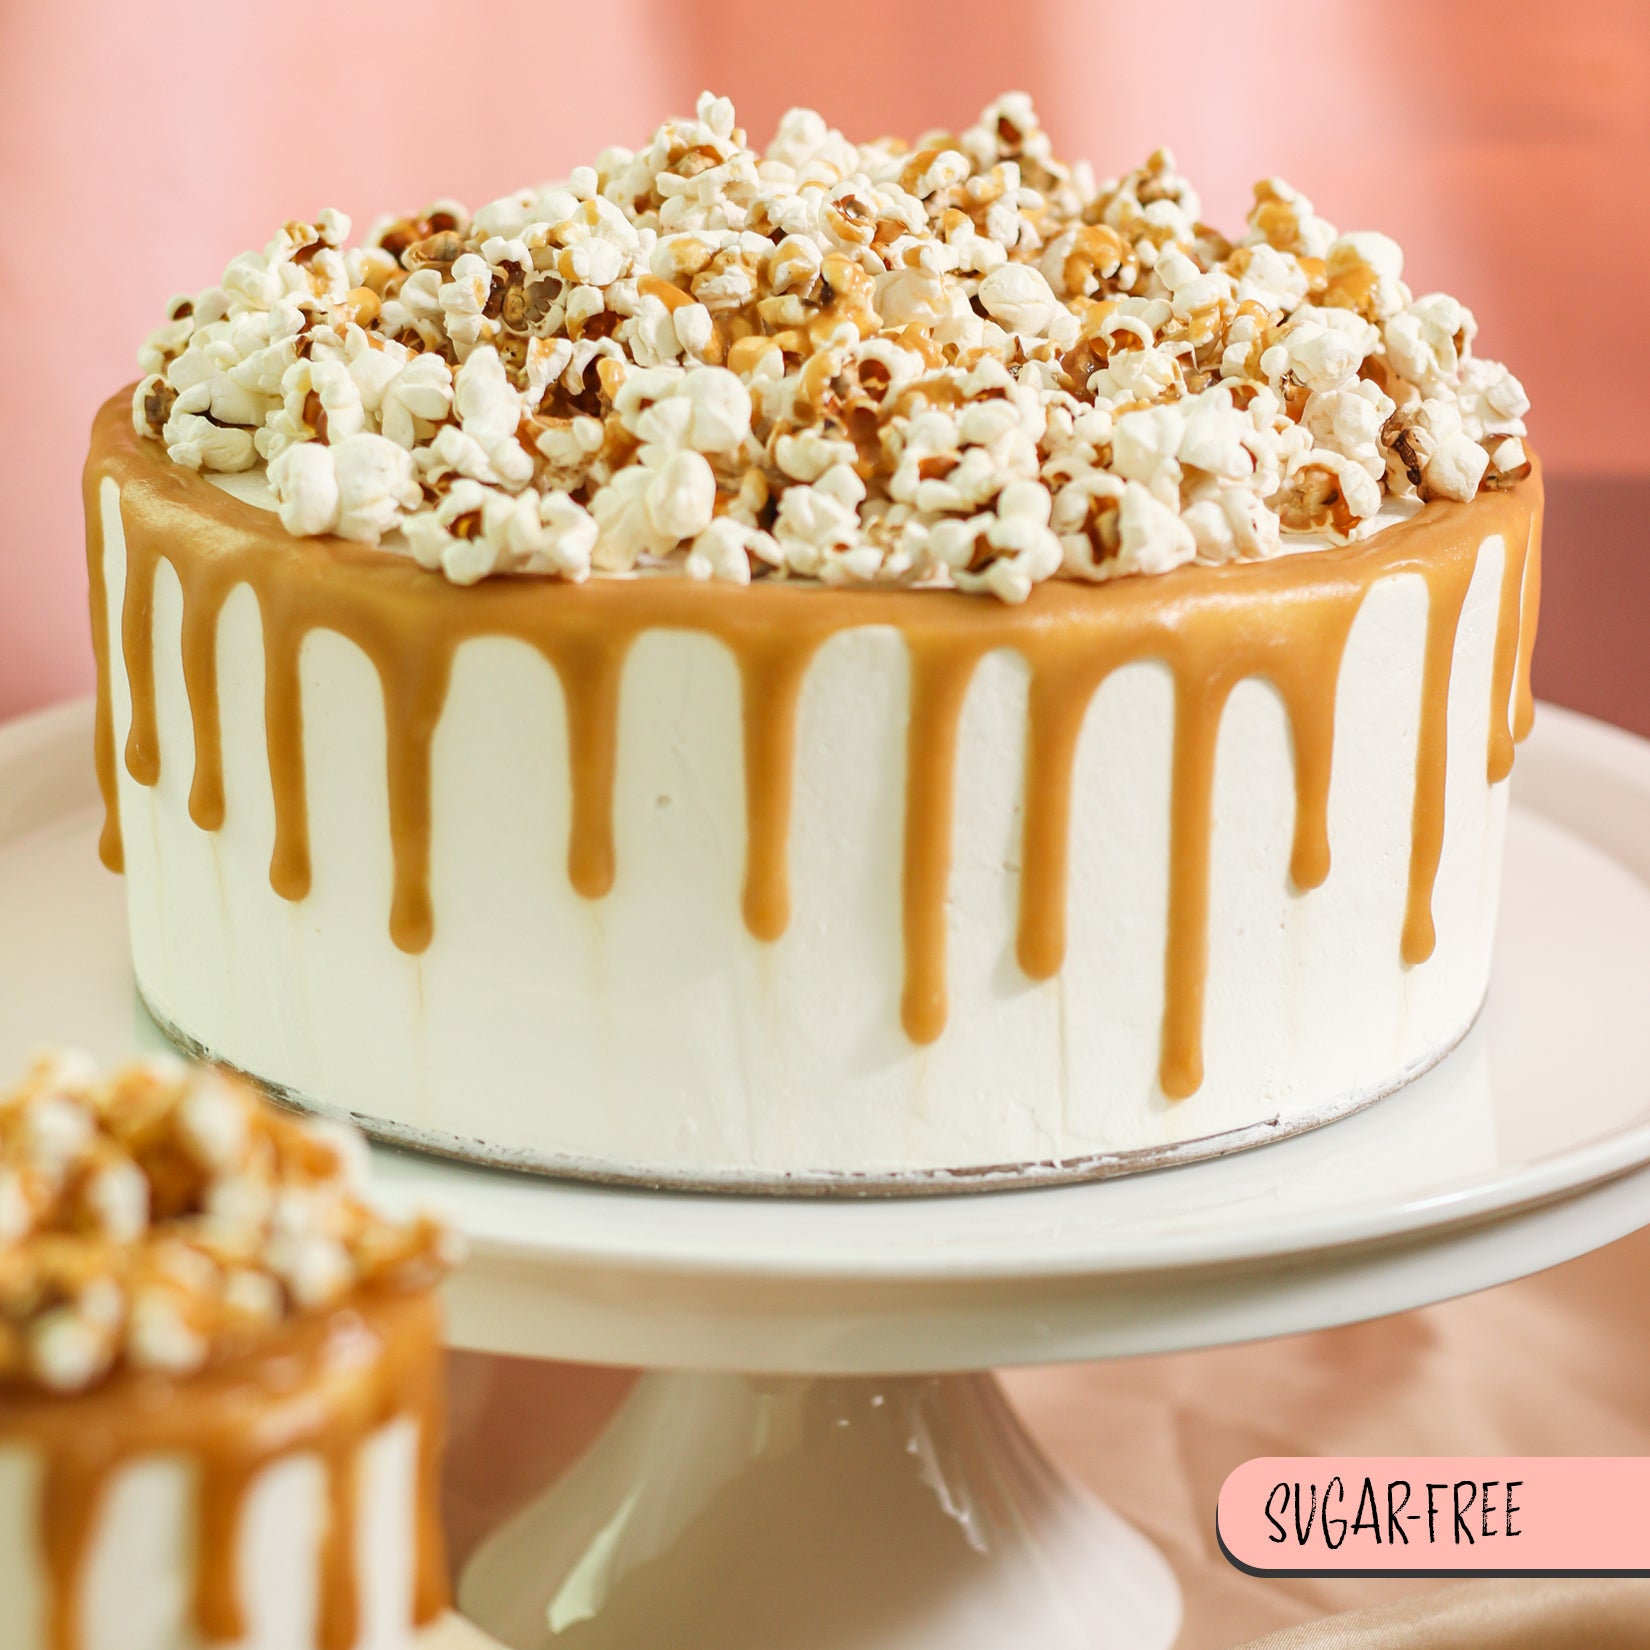 Delight your sweetheart with our 8” Sugar-Free Popcorn Caramel Cloud Cake, a heavenly sugar-free indulgence.